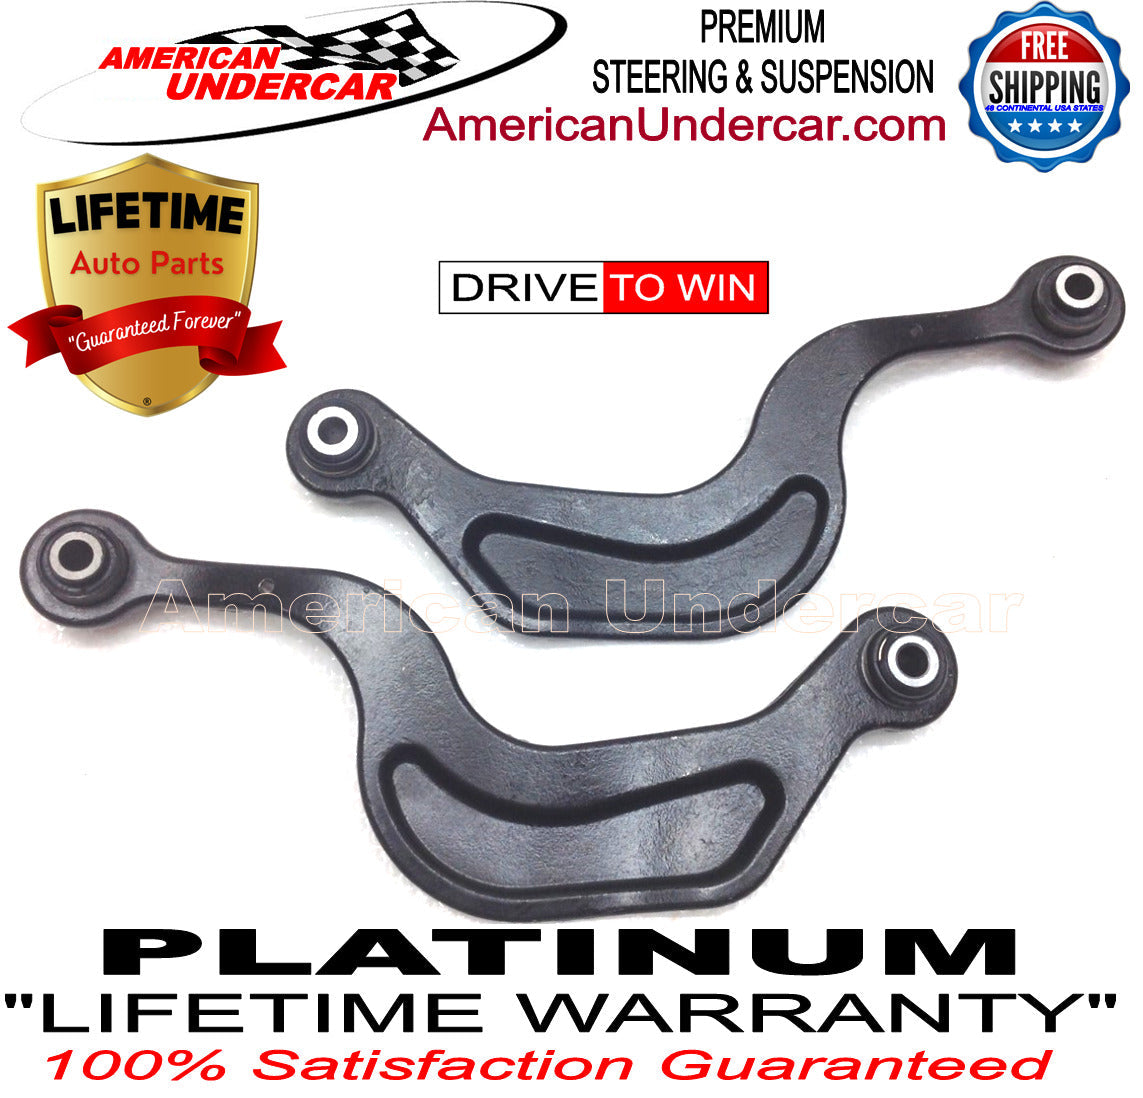 Lifetime Control Arm Rear Suspension Kit for 2007-2010 Saturn Outlook 2WD, AWD